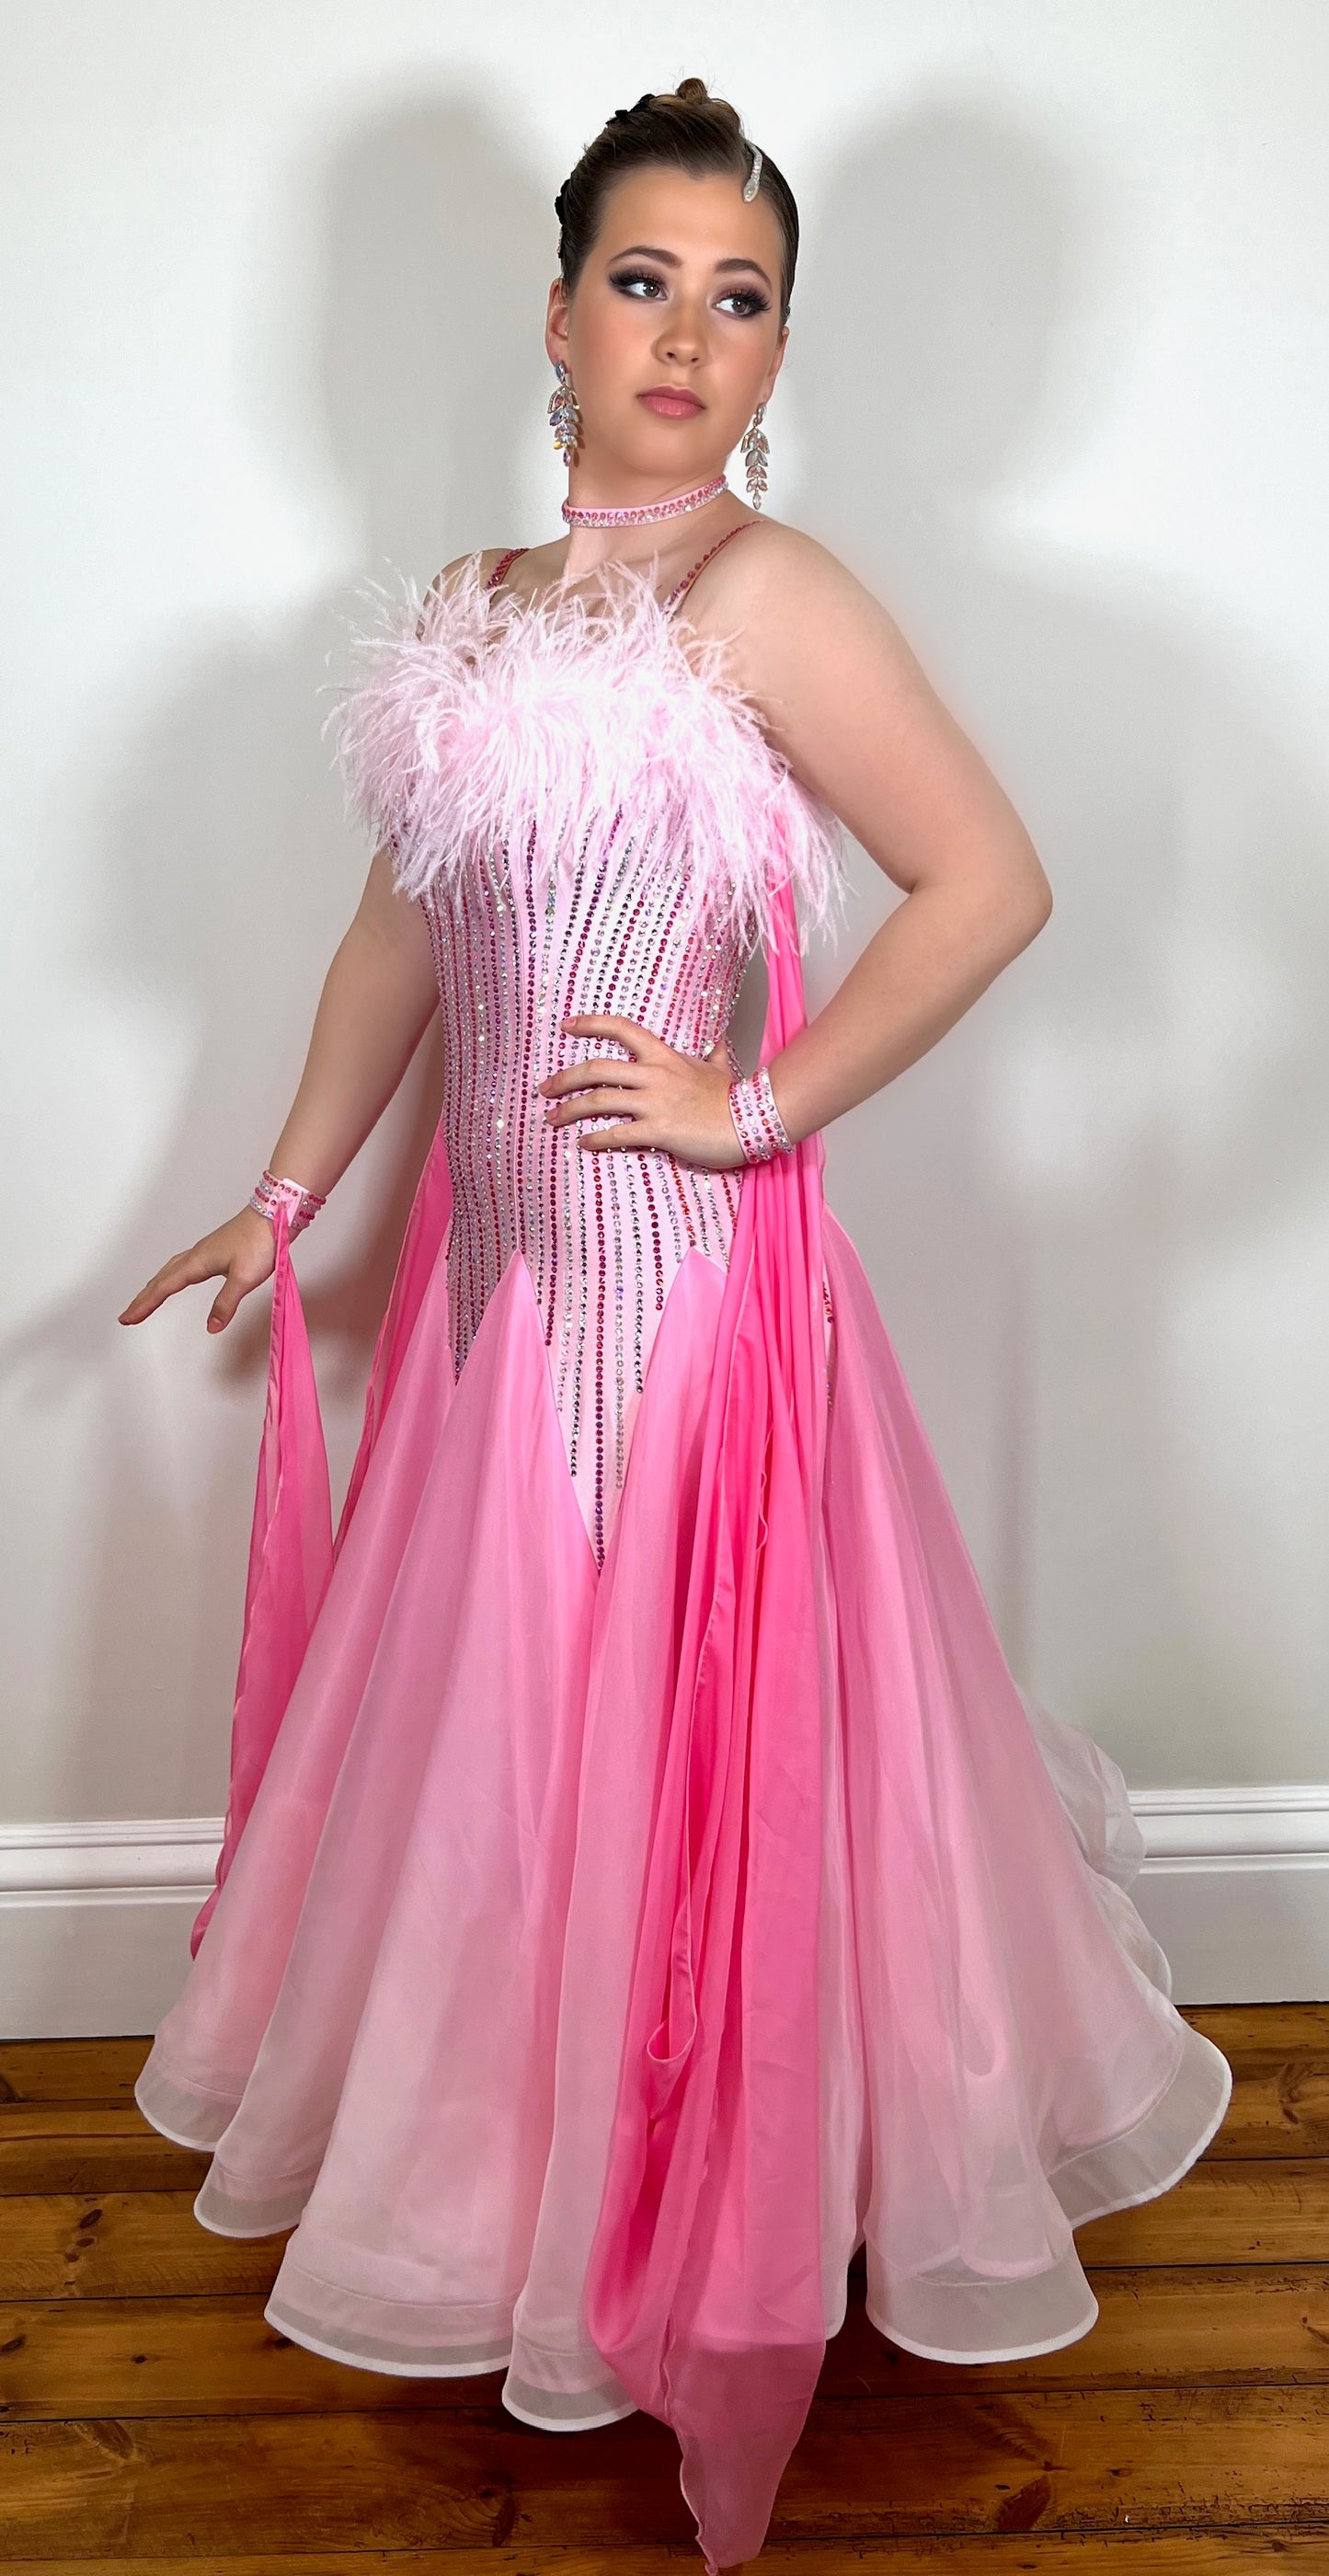 016 Pink & White Ombre Ballroom Dress with Ostrich feather to the upper chest area. Stoned in Light Tose, Rose, Rose AB & AB. Detachable floats